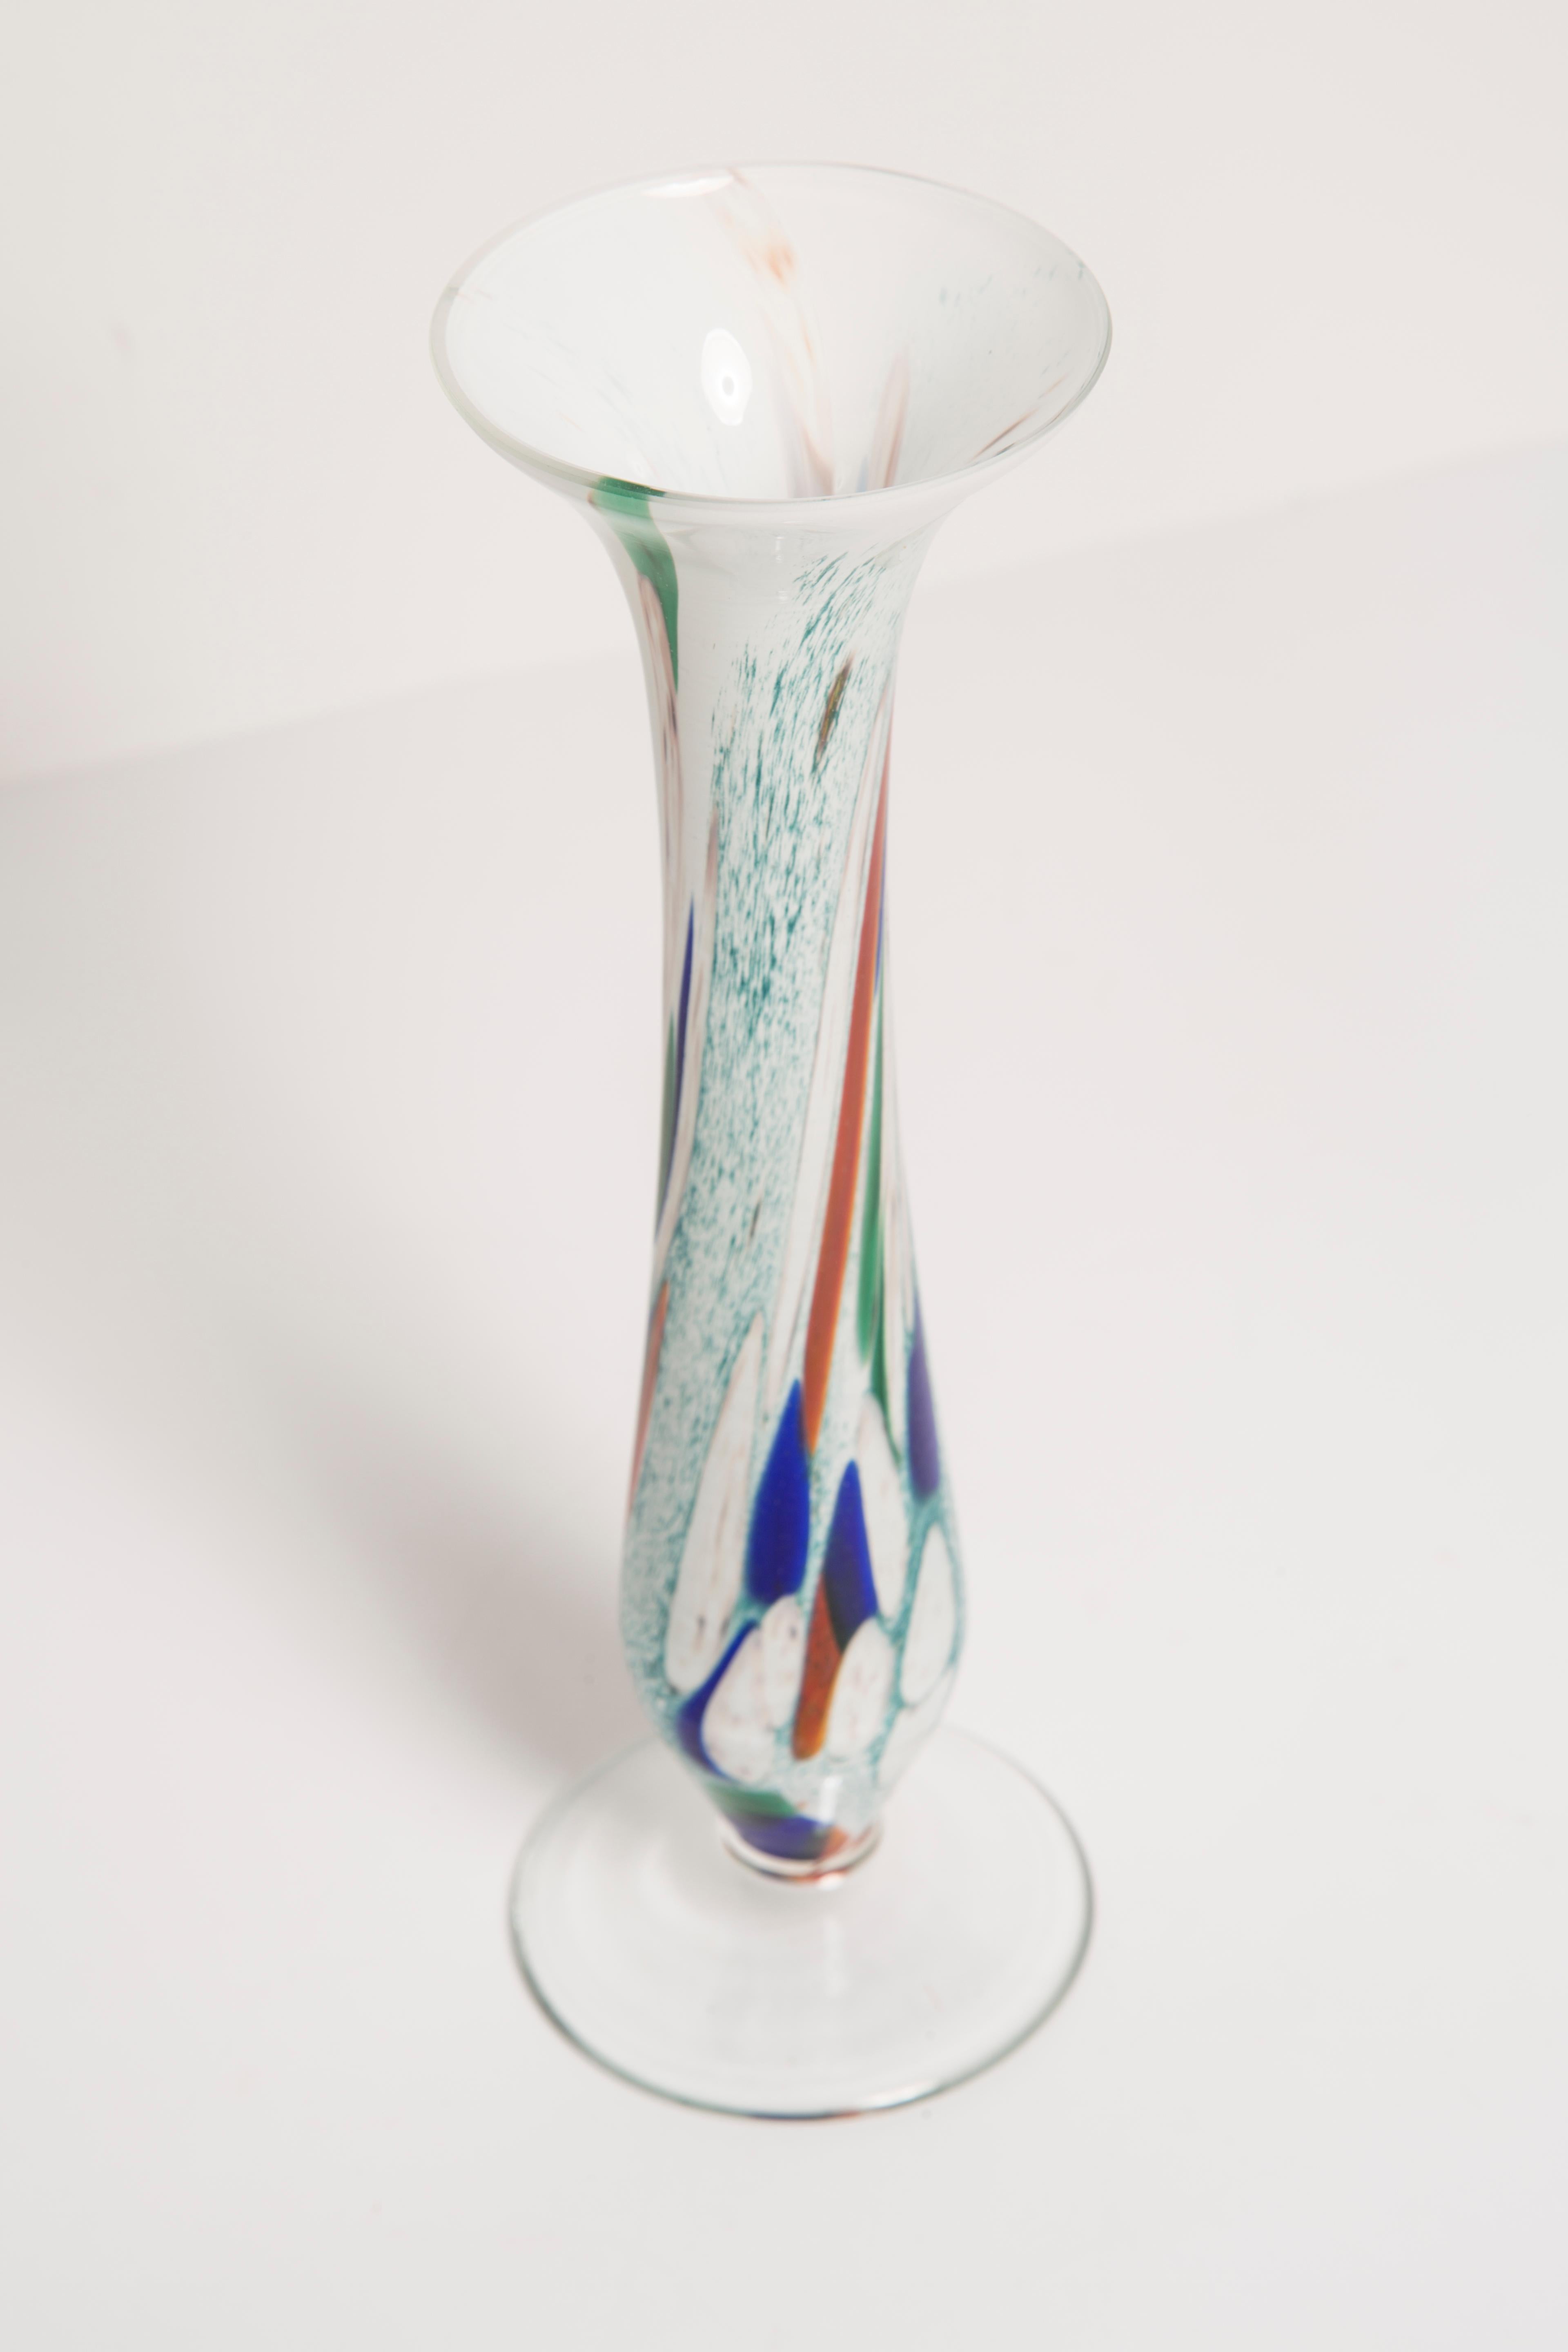 Glass Midcentury Vintage White and Blue Slim Murano Vase, Italy, 1960s For Sale